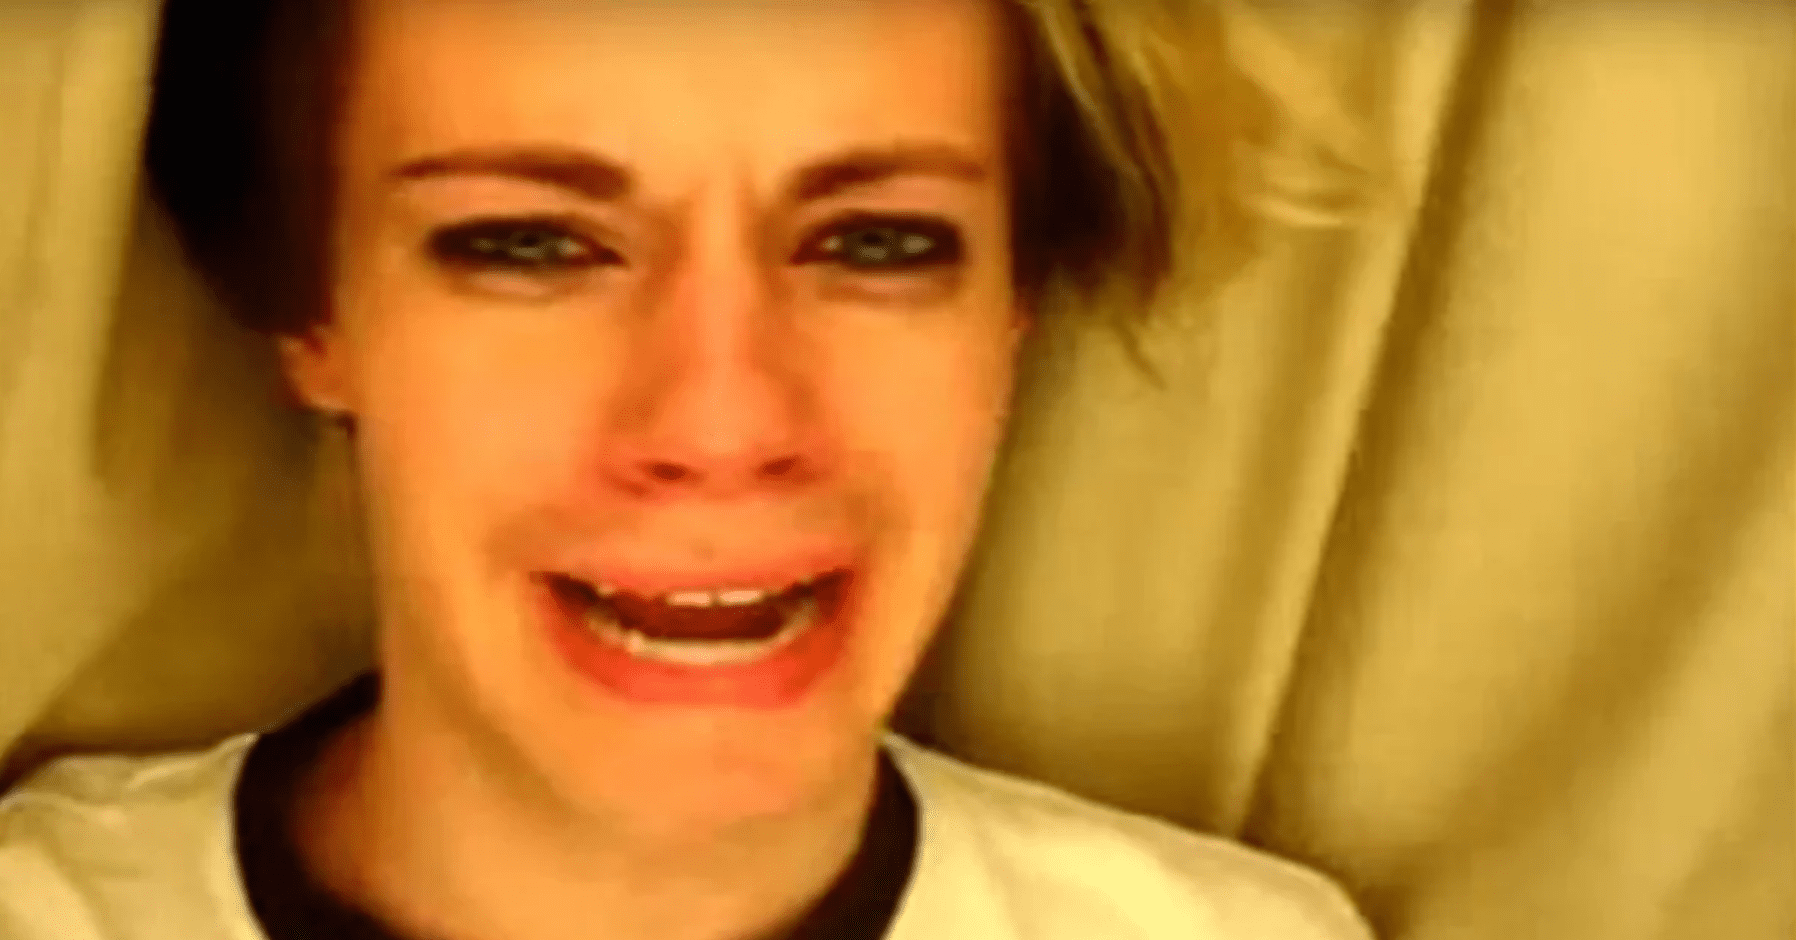 Chris Crocker, Better Known as the 'Leave Britney Alone!' Guy, Is Really Now, Much Stronger Than Yesterday.